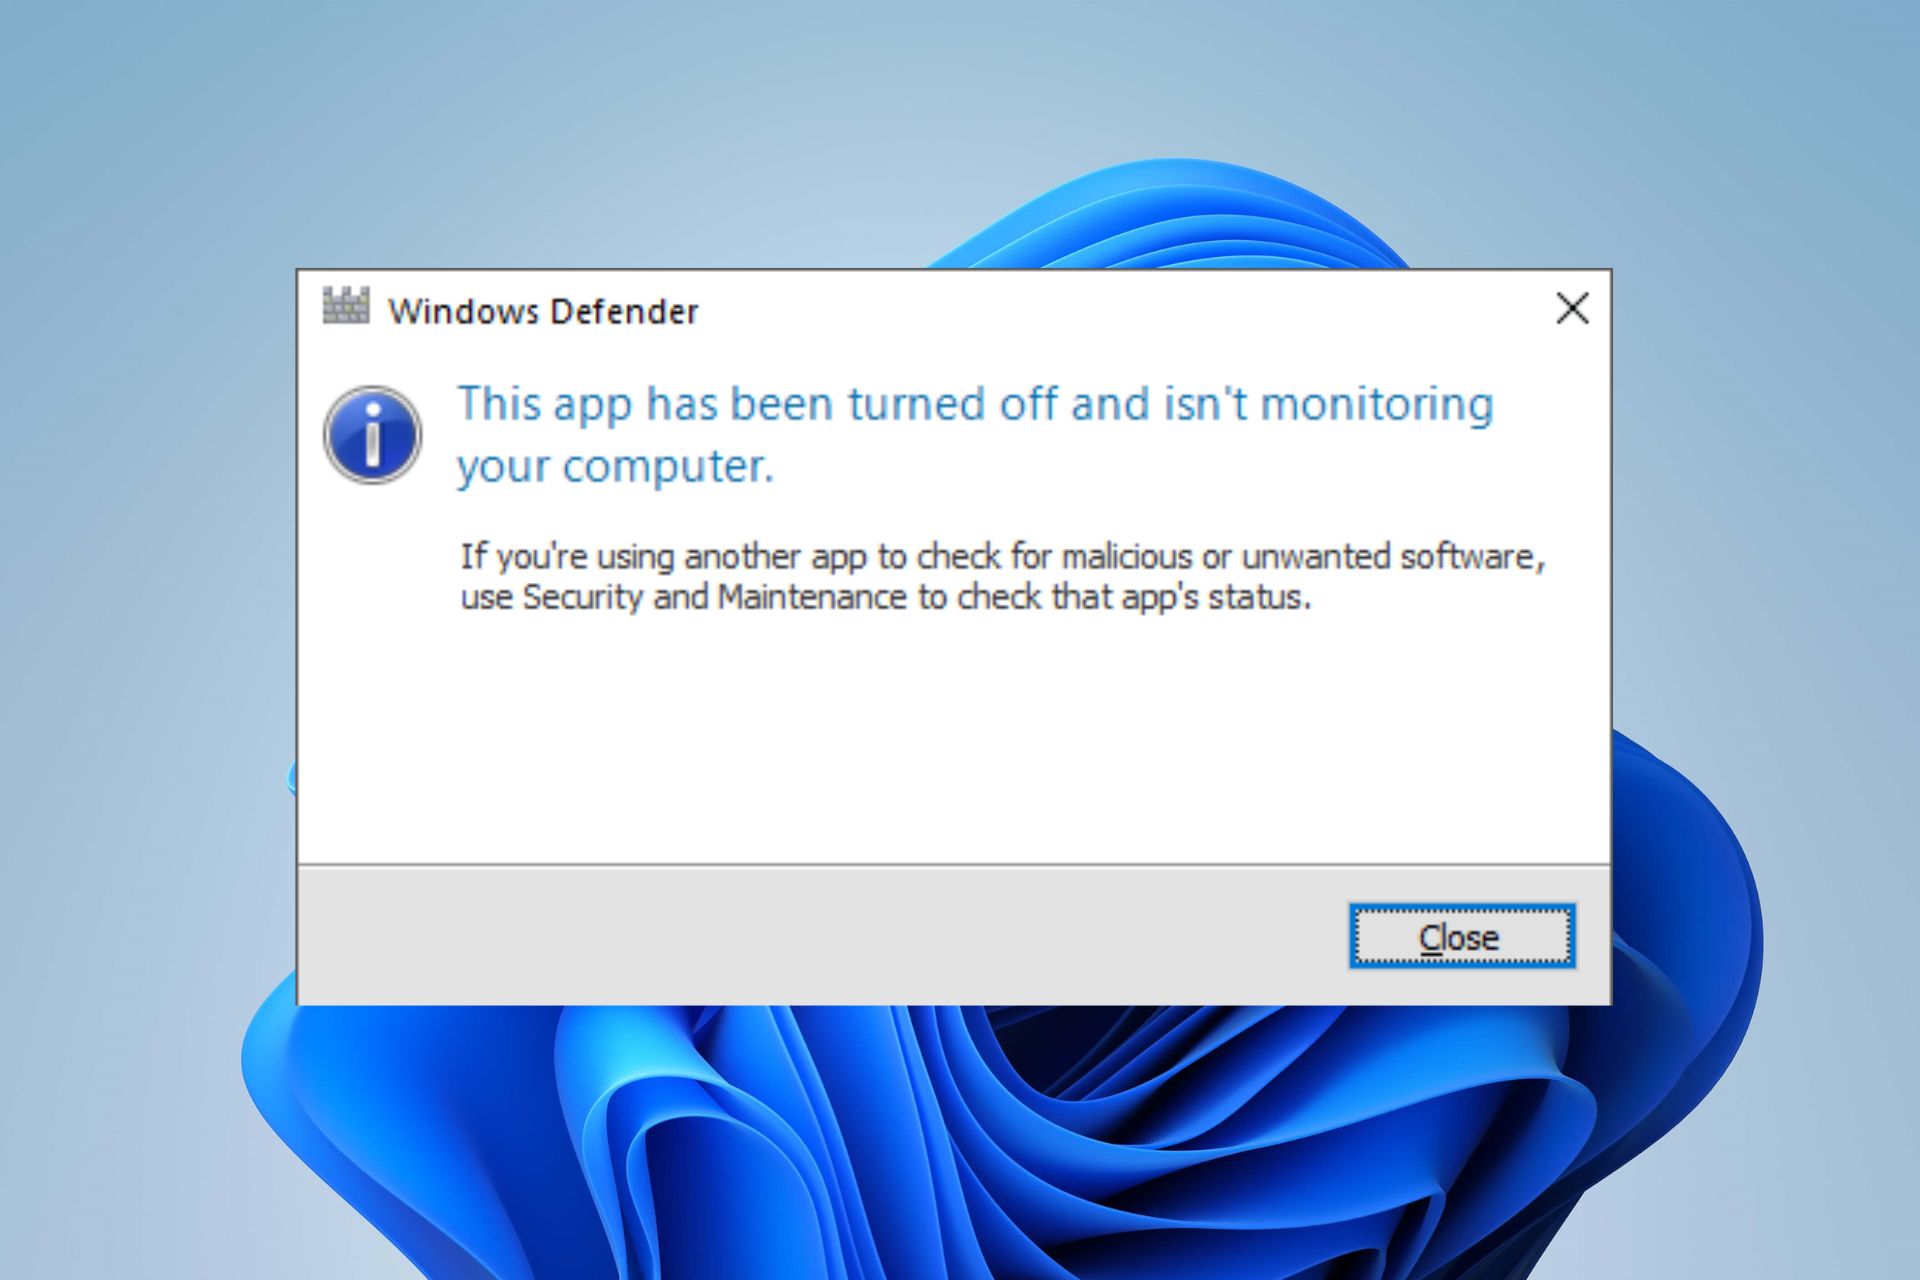 this app has been turned off and isn't monitoring your computer